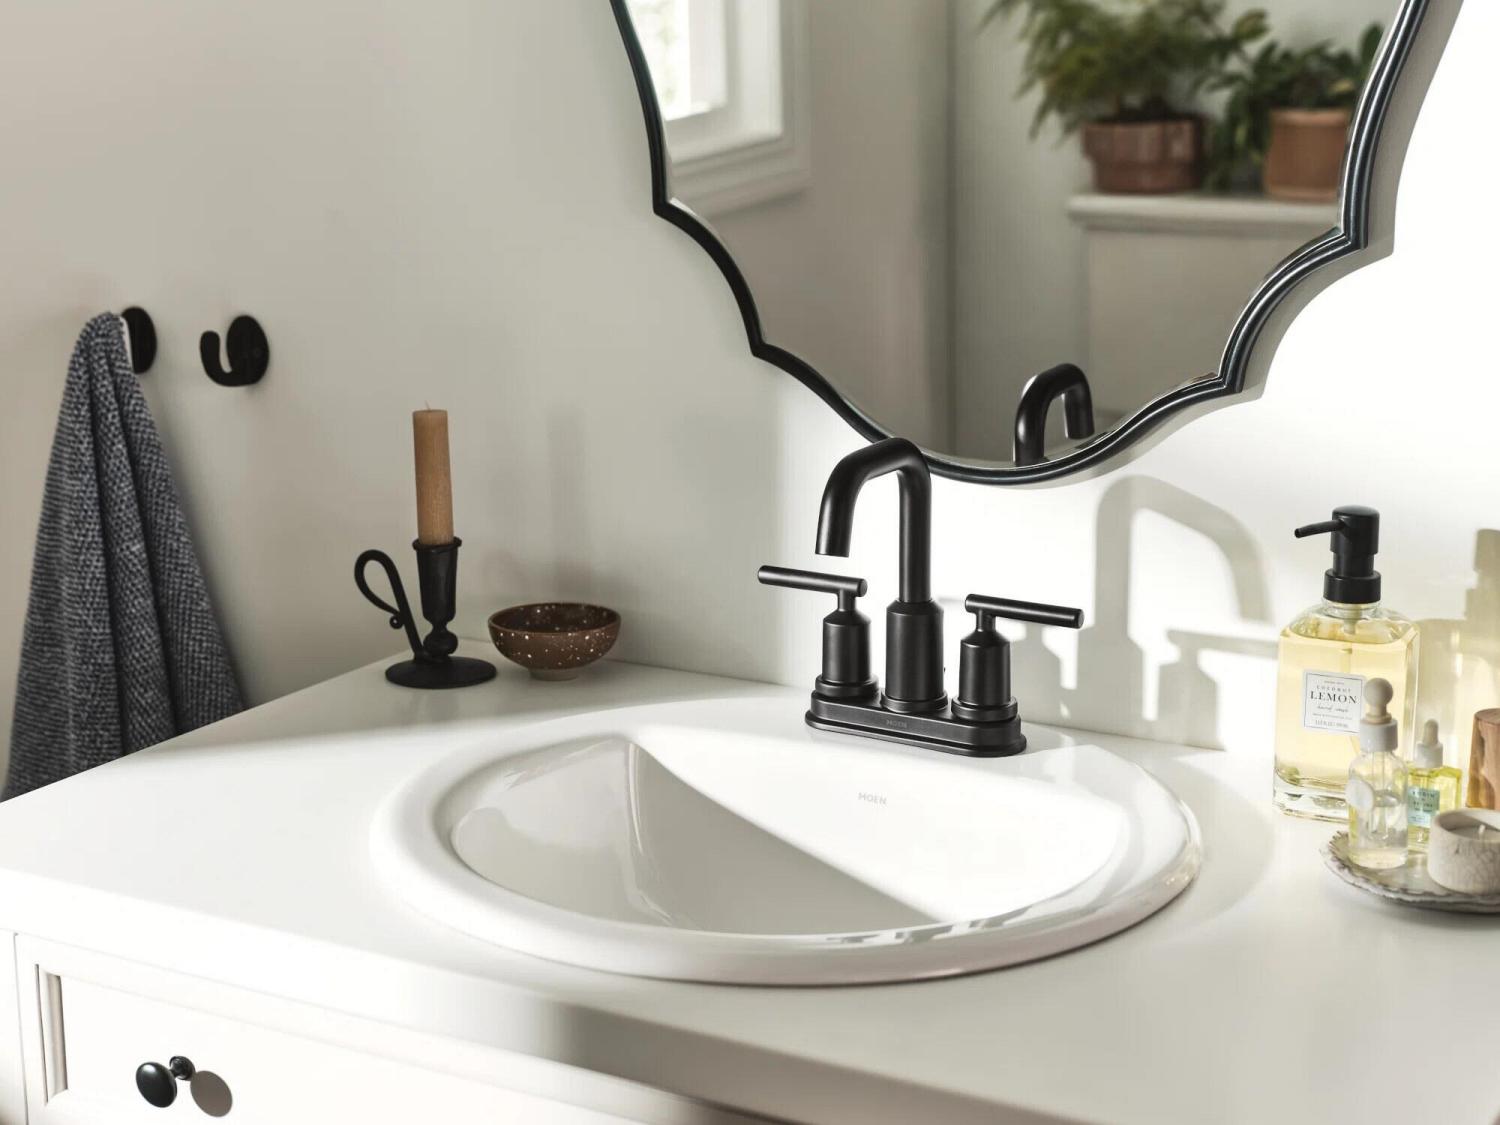 2023 Centerset Bathroom Faucets: Completely Style and Functionality - Blog - 1